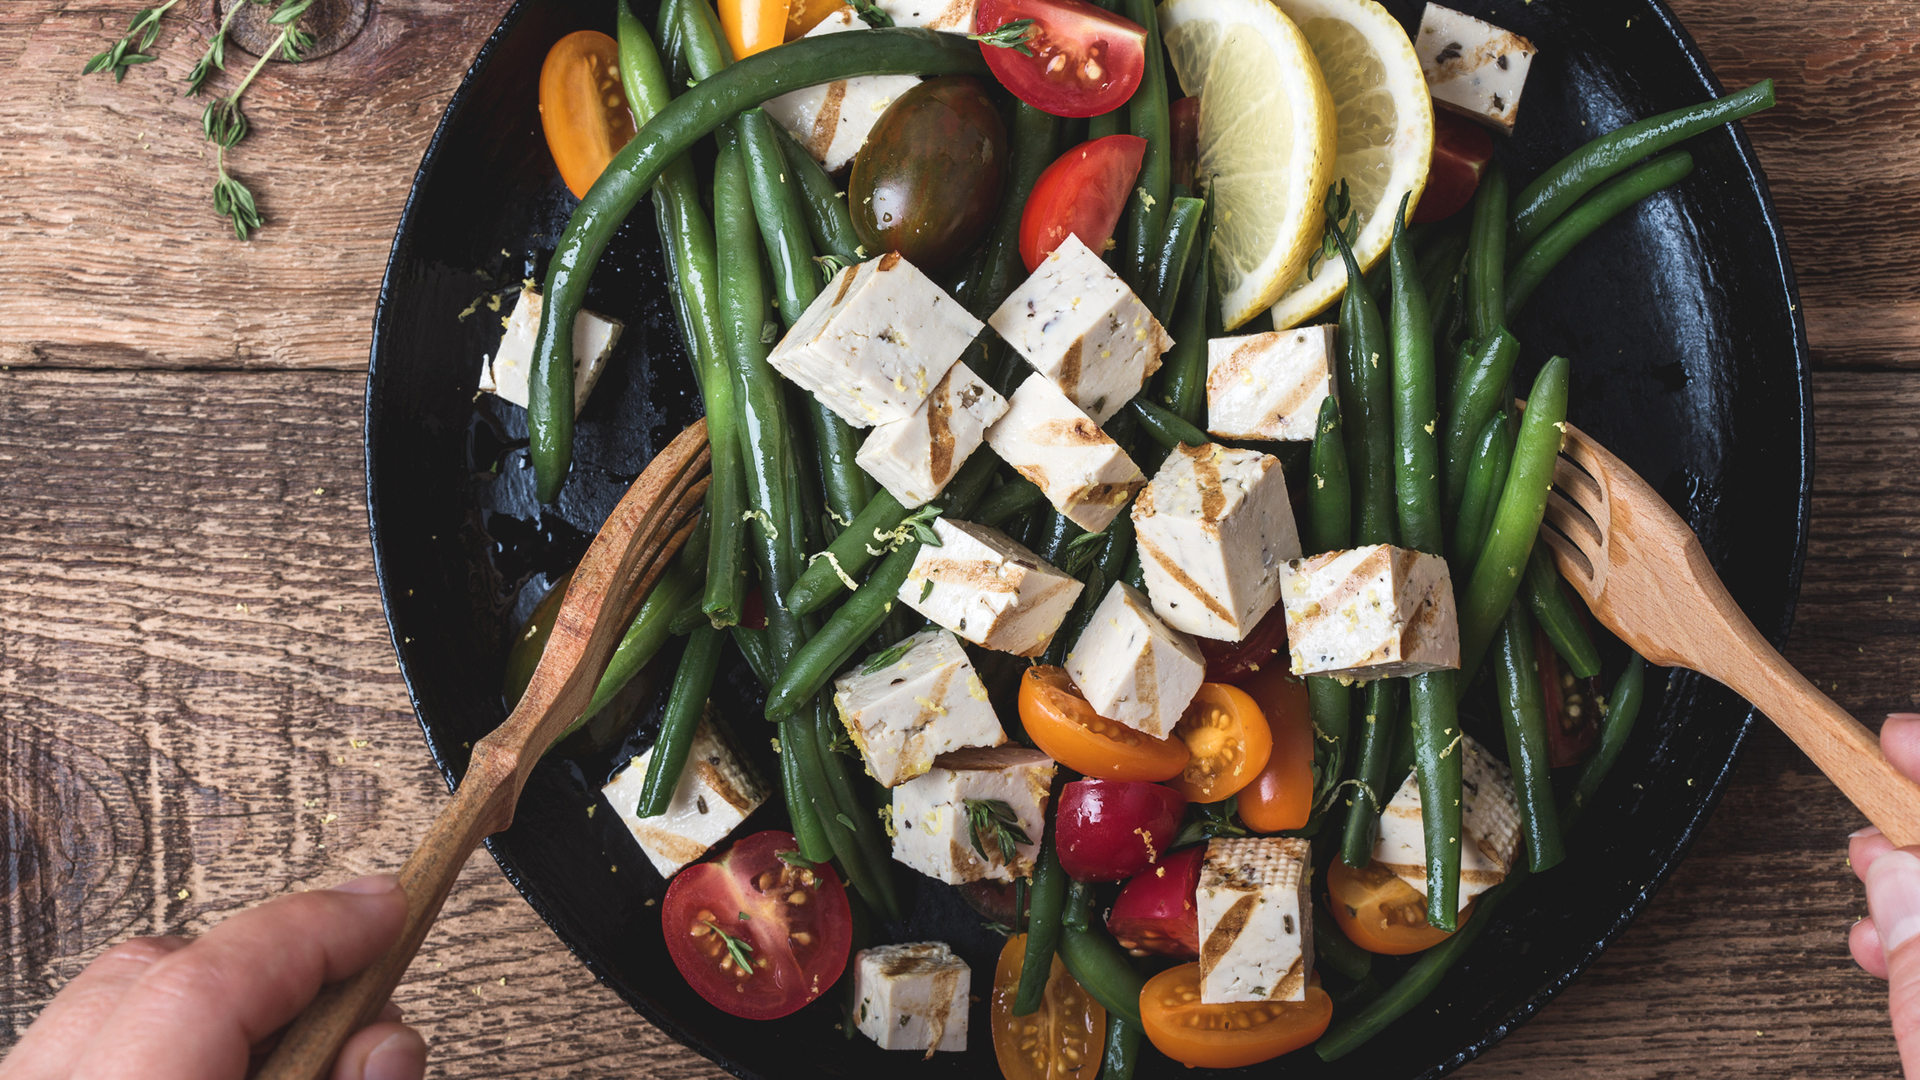 Delicious summer vegan meal, cooking healthy green beans salad with grilled tofu, fresh colorful mix cherry tomatoes, thyme herbs and lemon zest served in rural cast iron skillet, wooden forks, top view